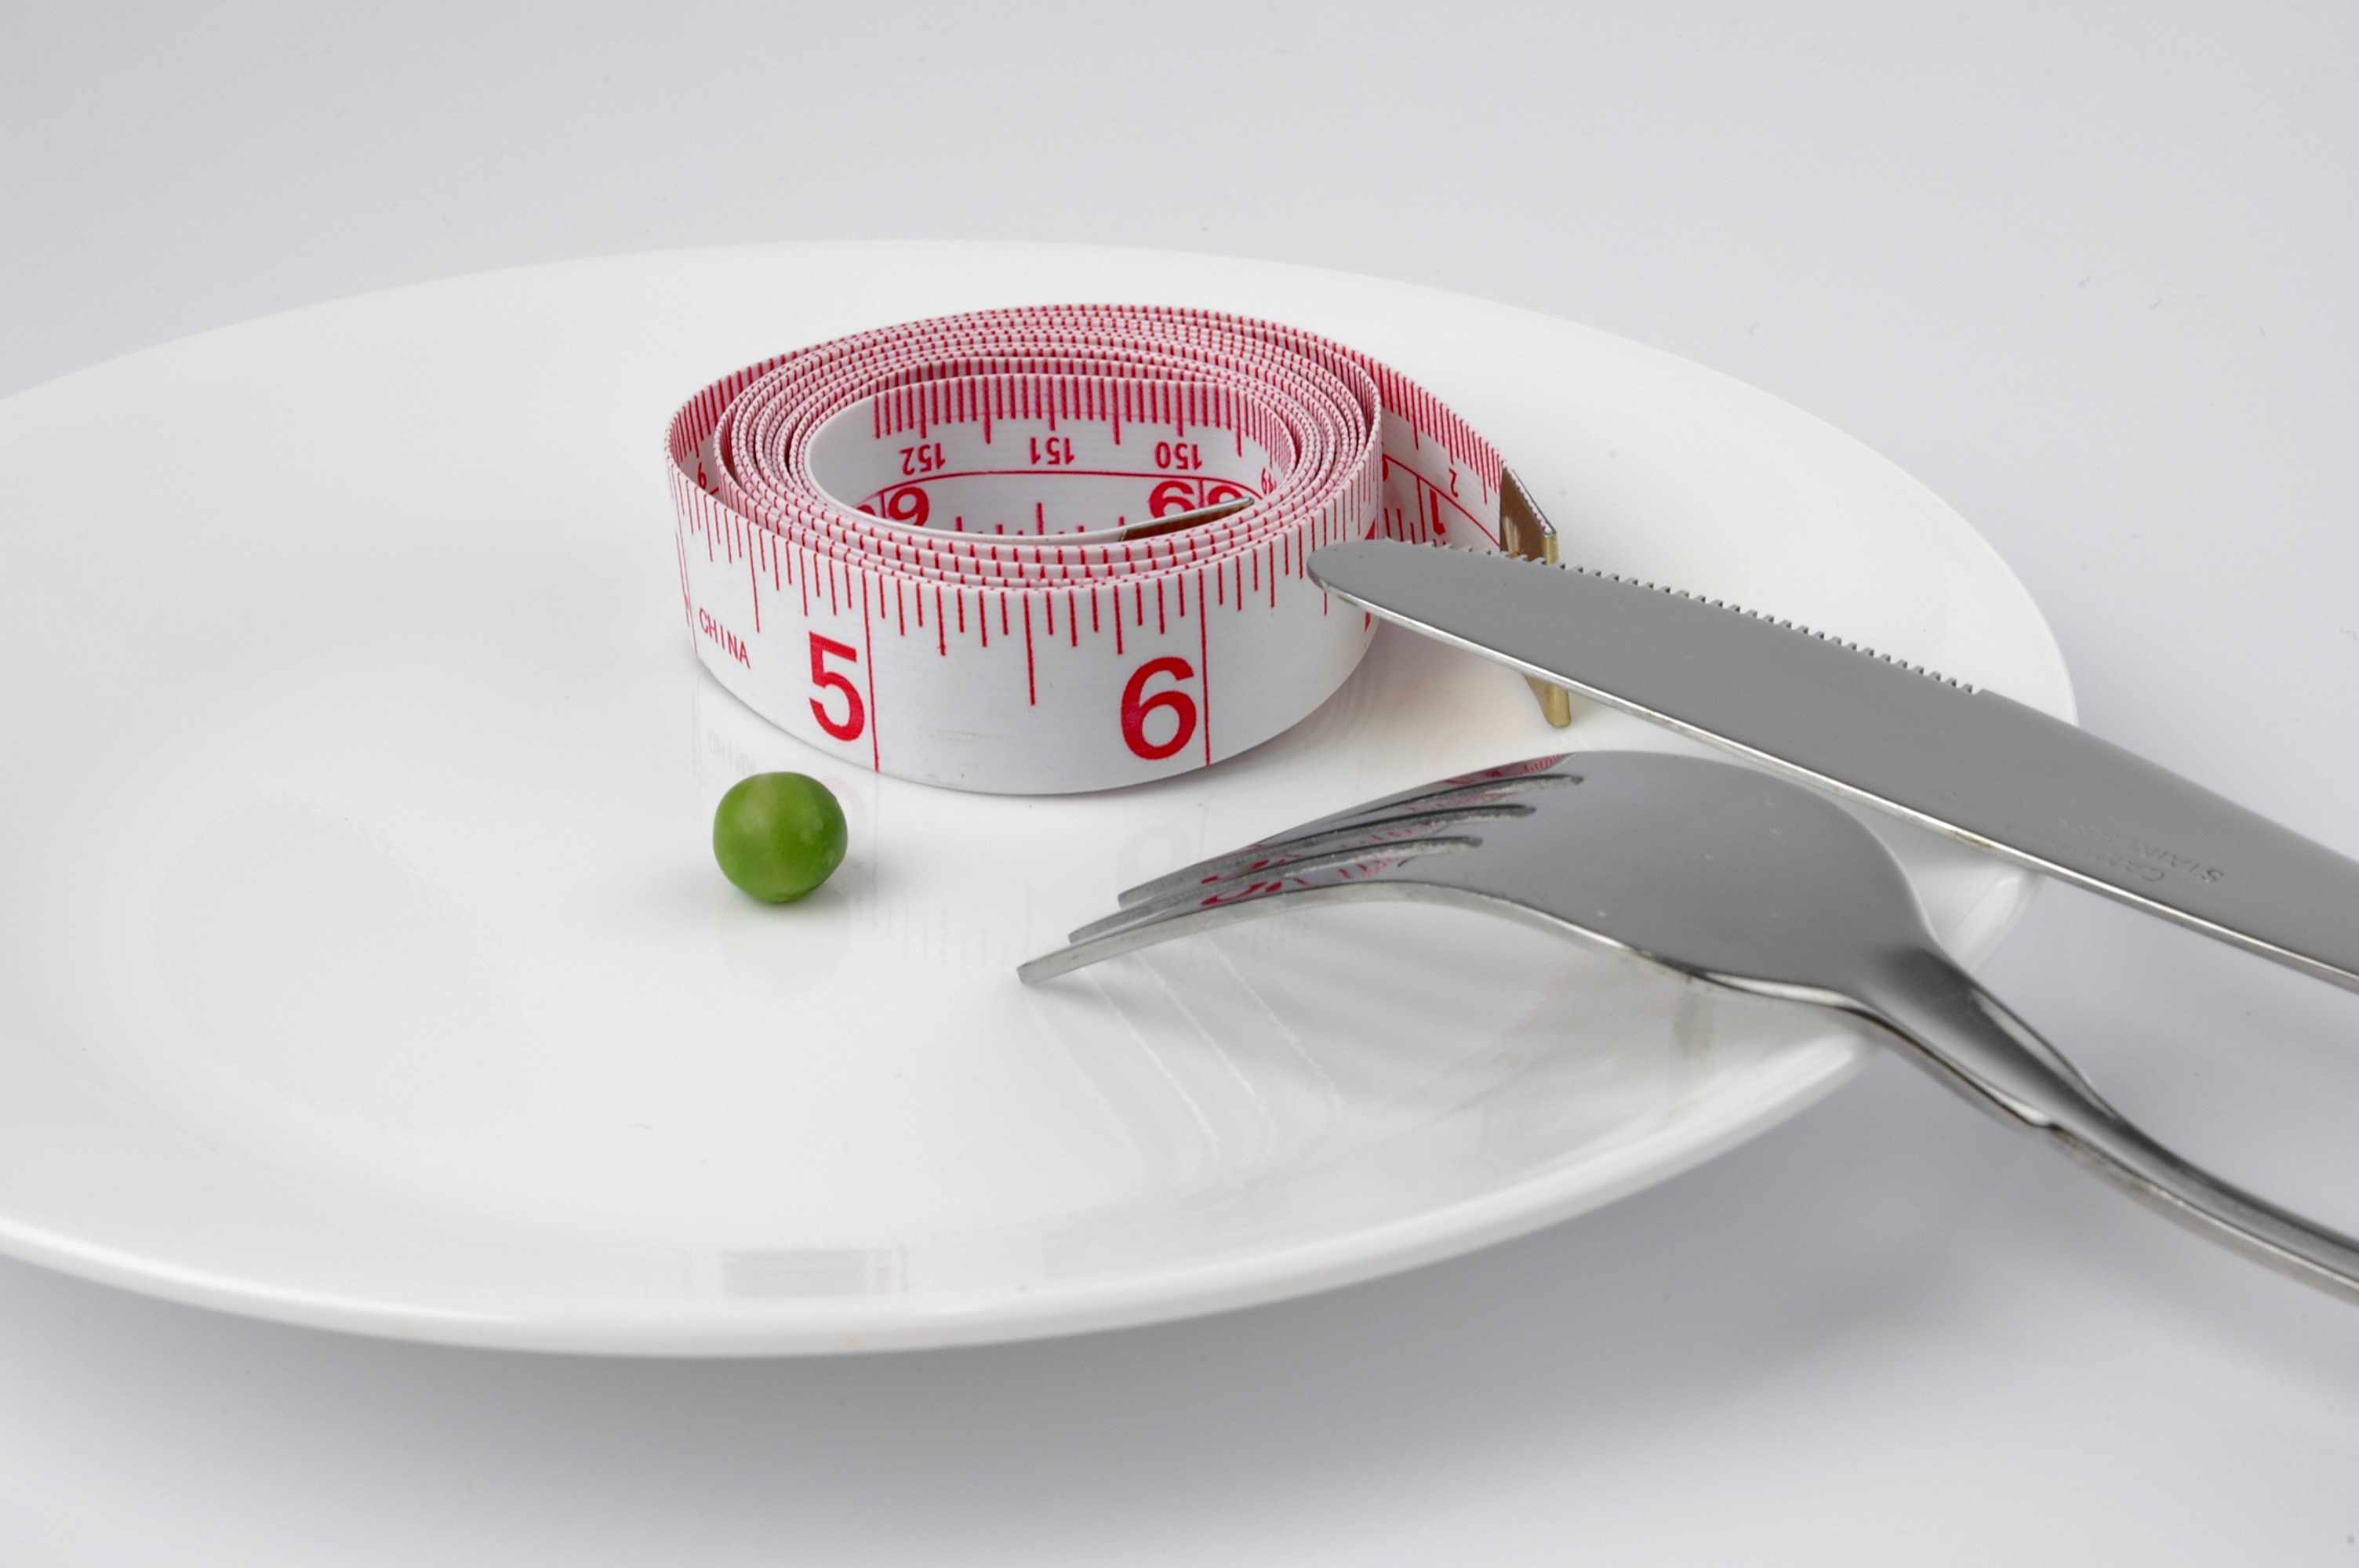 empty plate with tape measure and one pea representing eating disorder